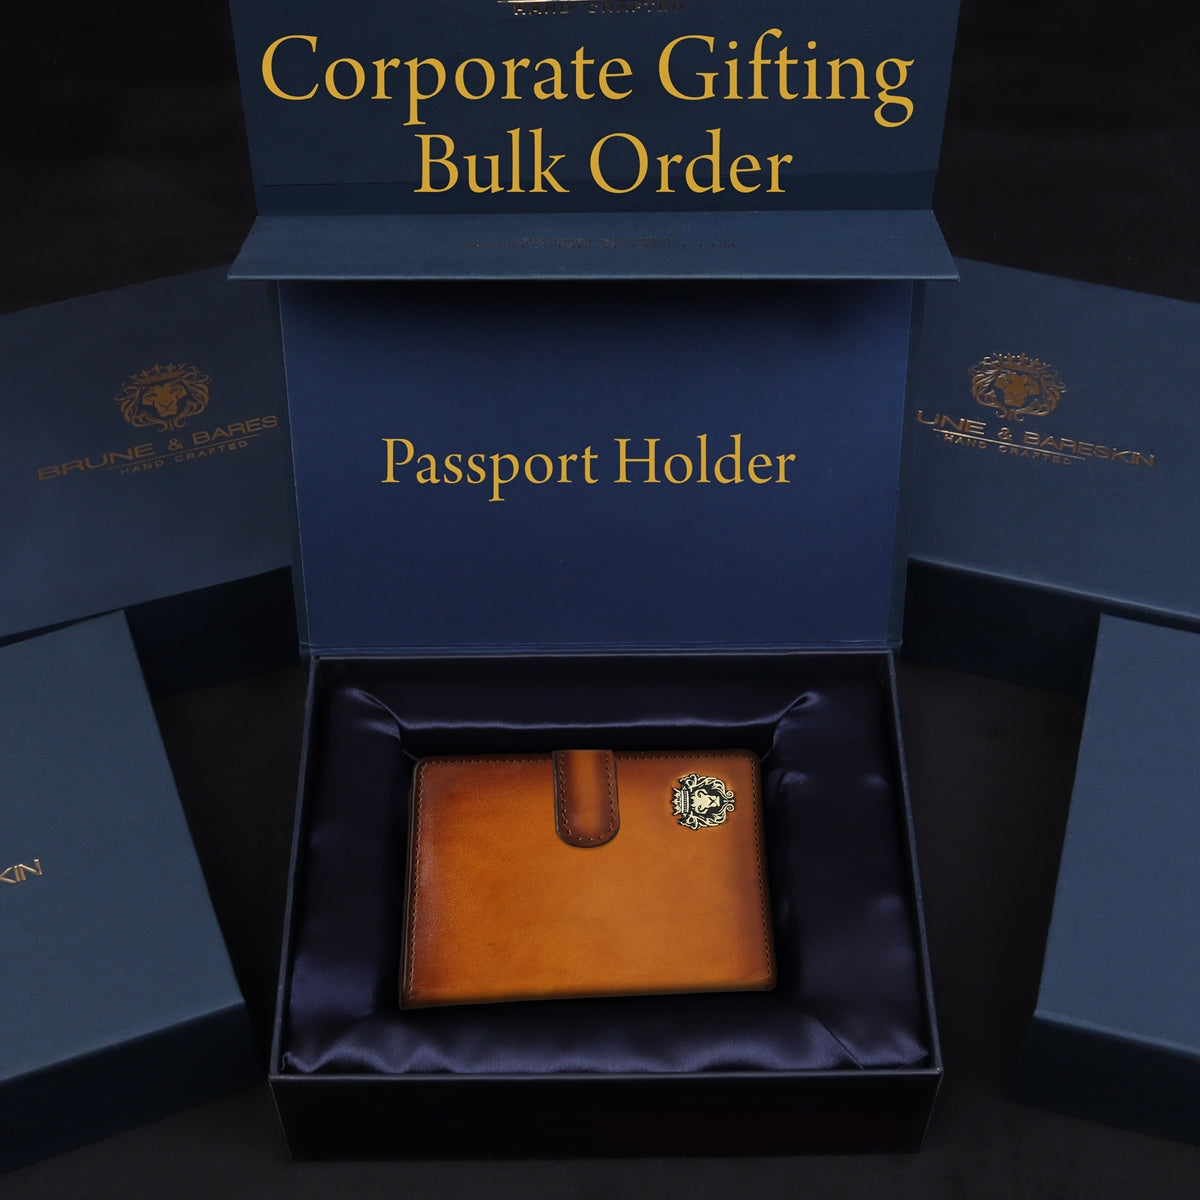 Customized Corporate Gifting Genuine Leather Passport Holder with Foldable Boarding Pass Pocket Bulk Order (Reference Price for 1 Unit)